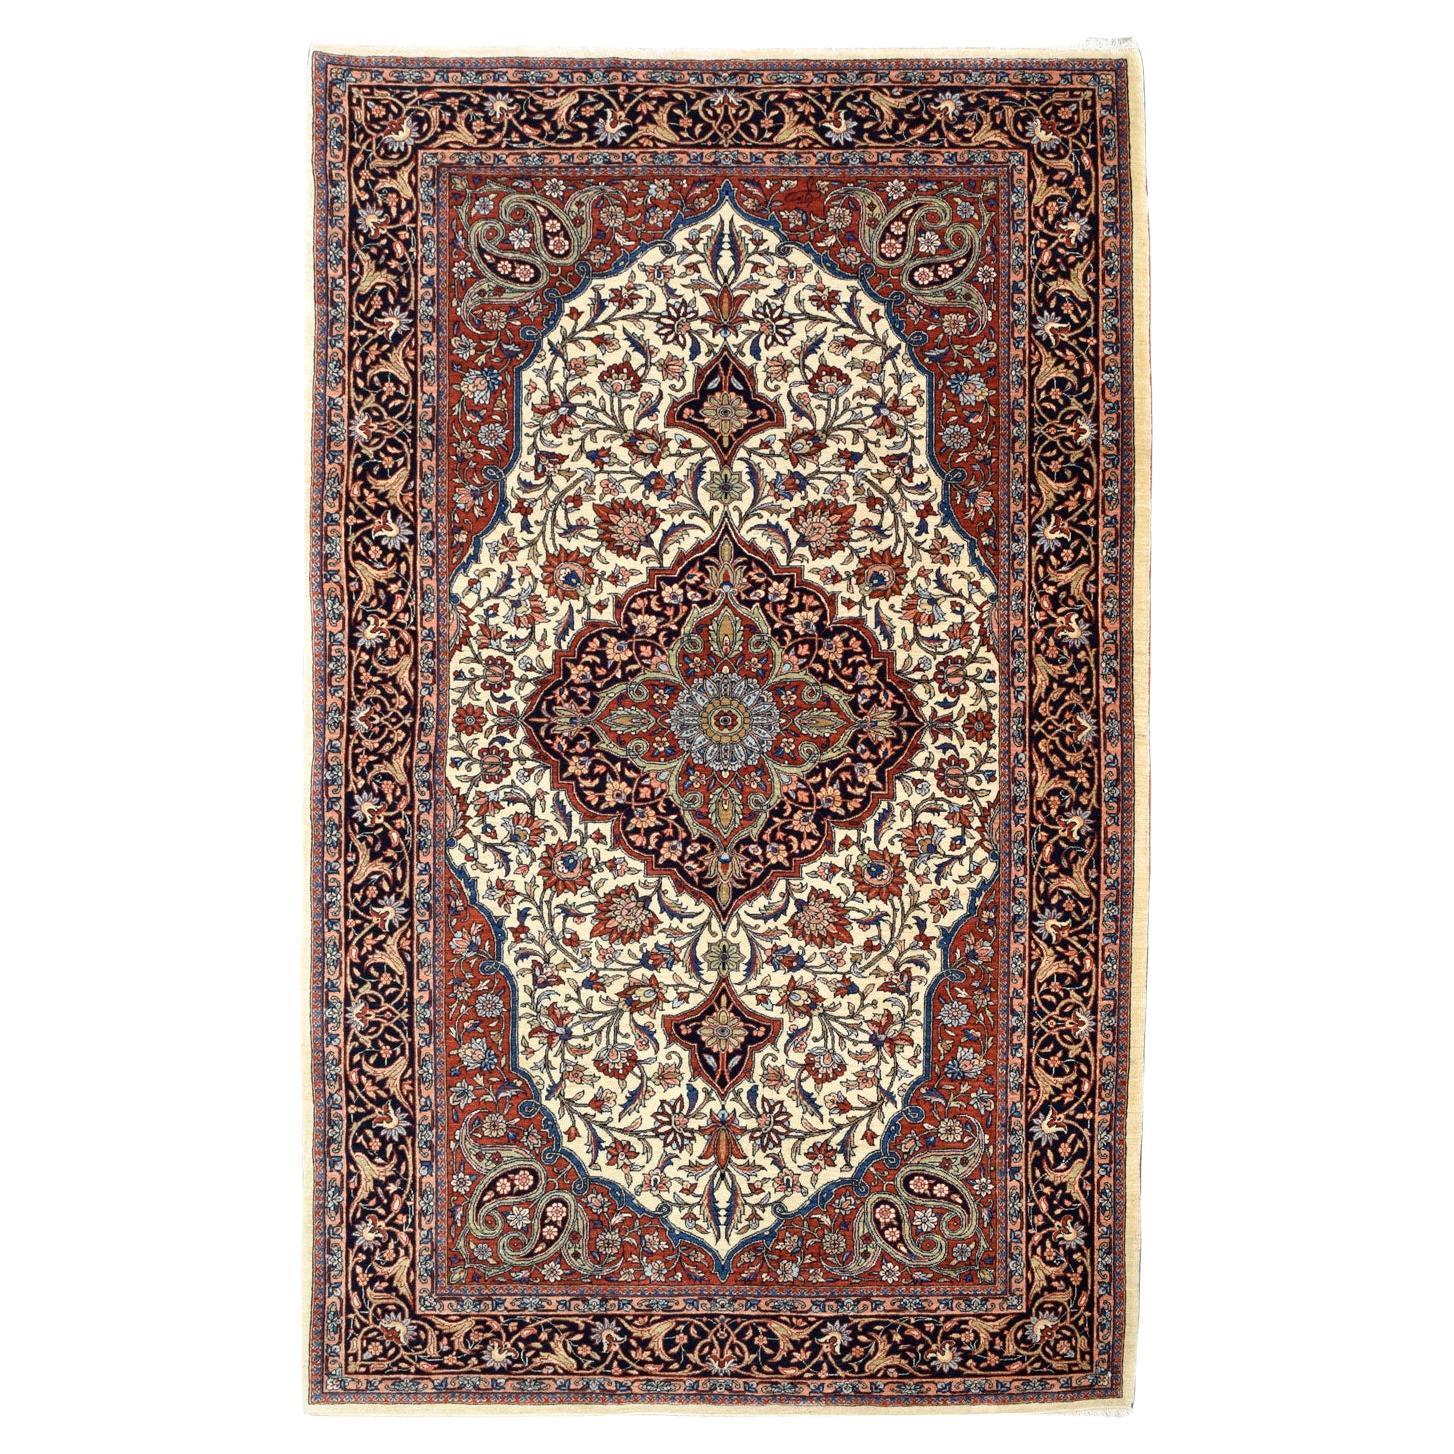 Pure Wool Blue, Red, and Cream Mohtashan Persian Rug, 5' x 7'